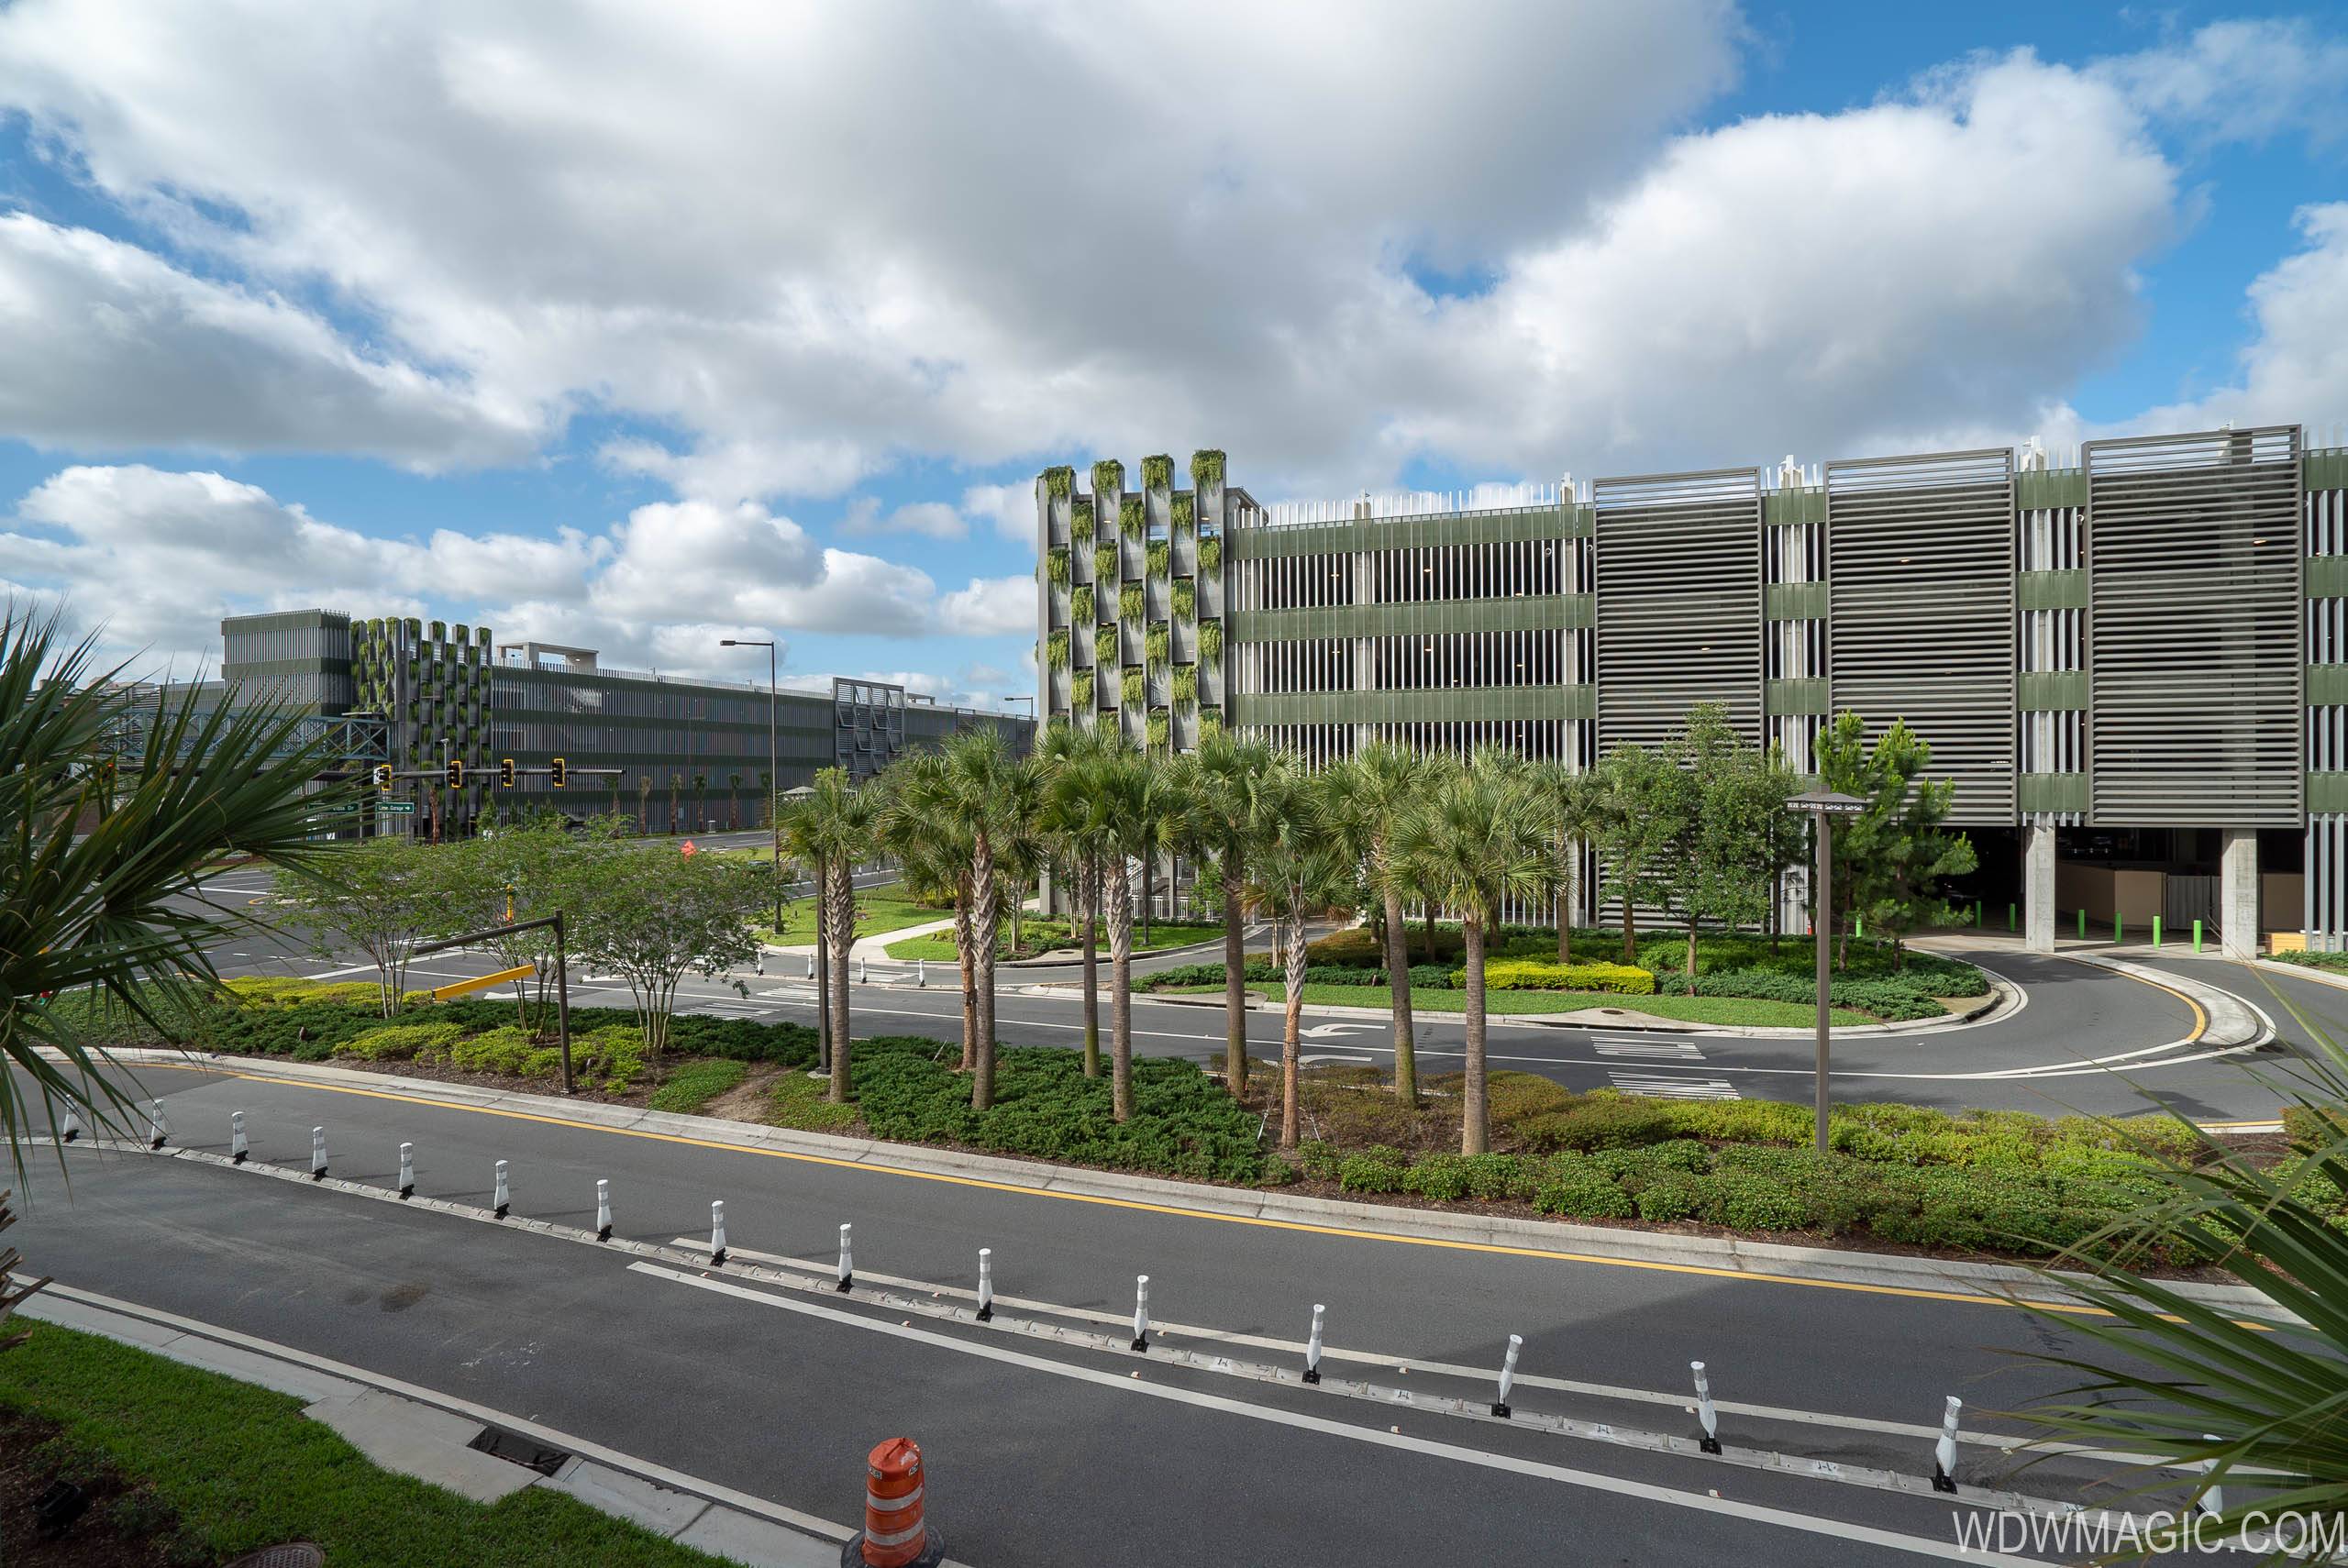 VIDEO - Drive through of the new Grapefruit Parking Garage at Disney Springs